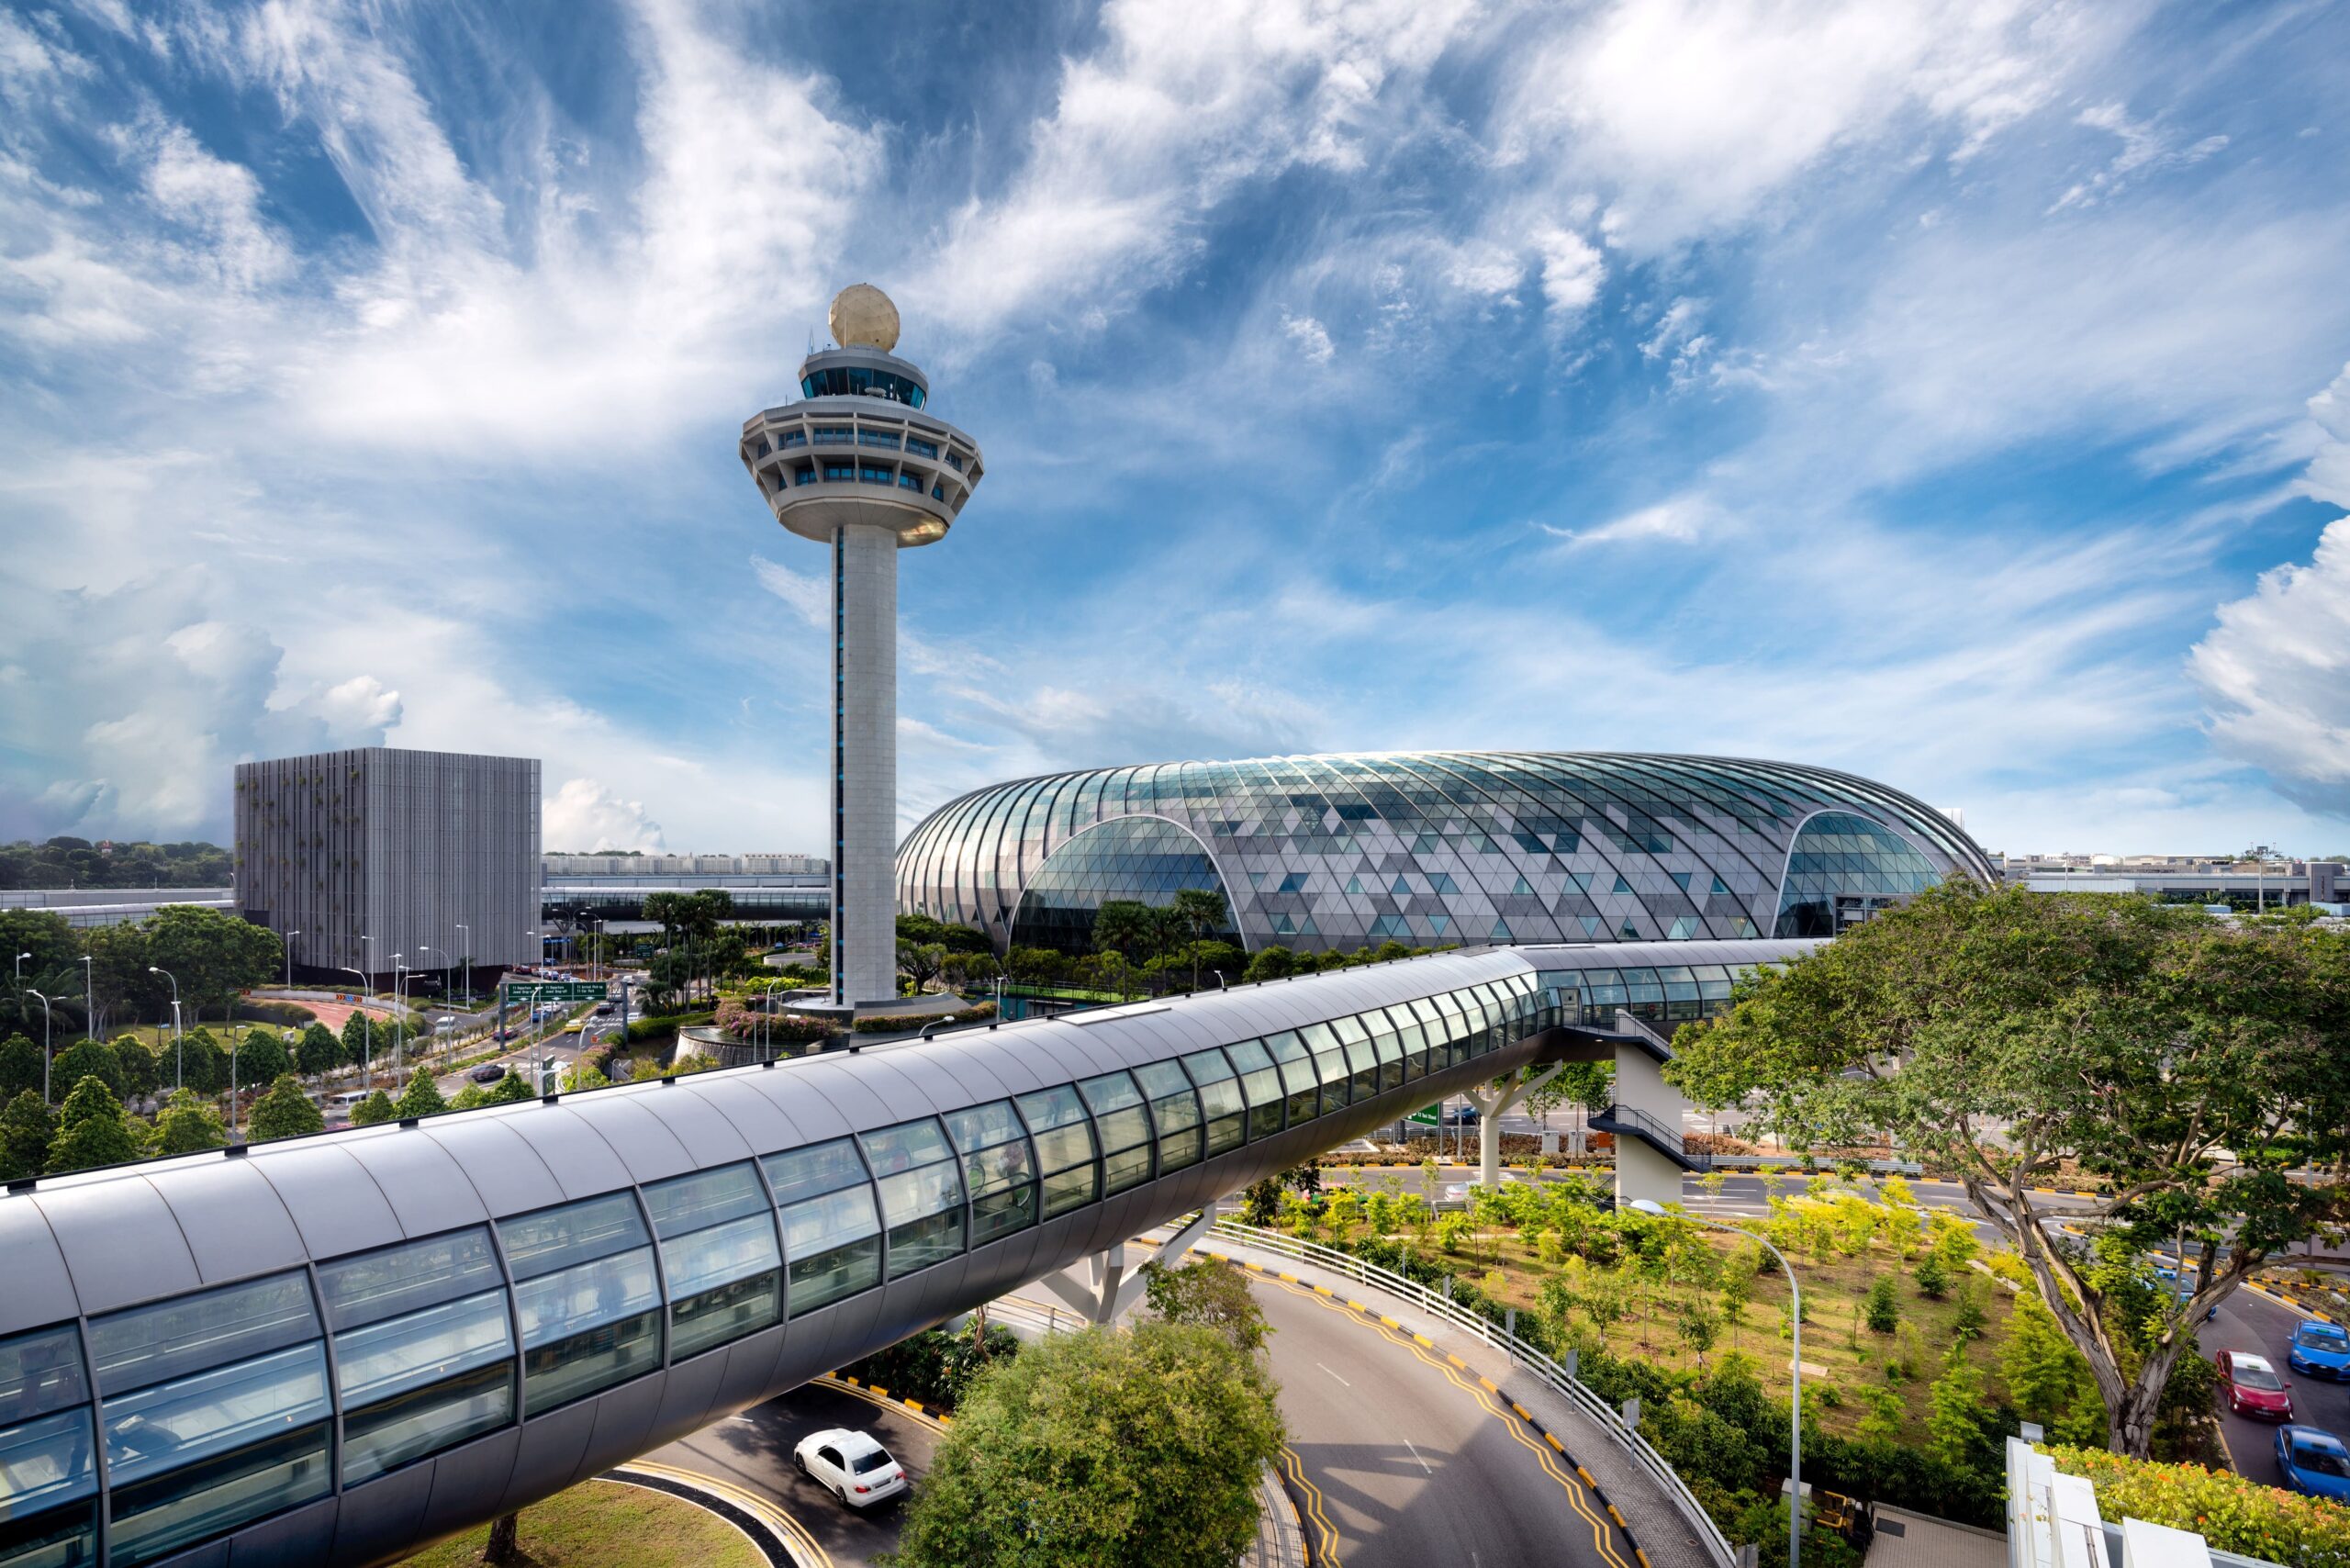 India Emerges as 5th among top passenger markets for Singapore’s Changi Airport